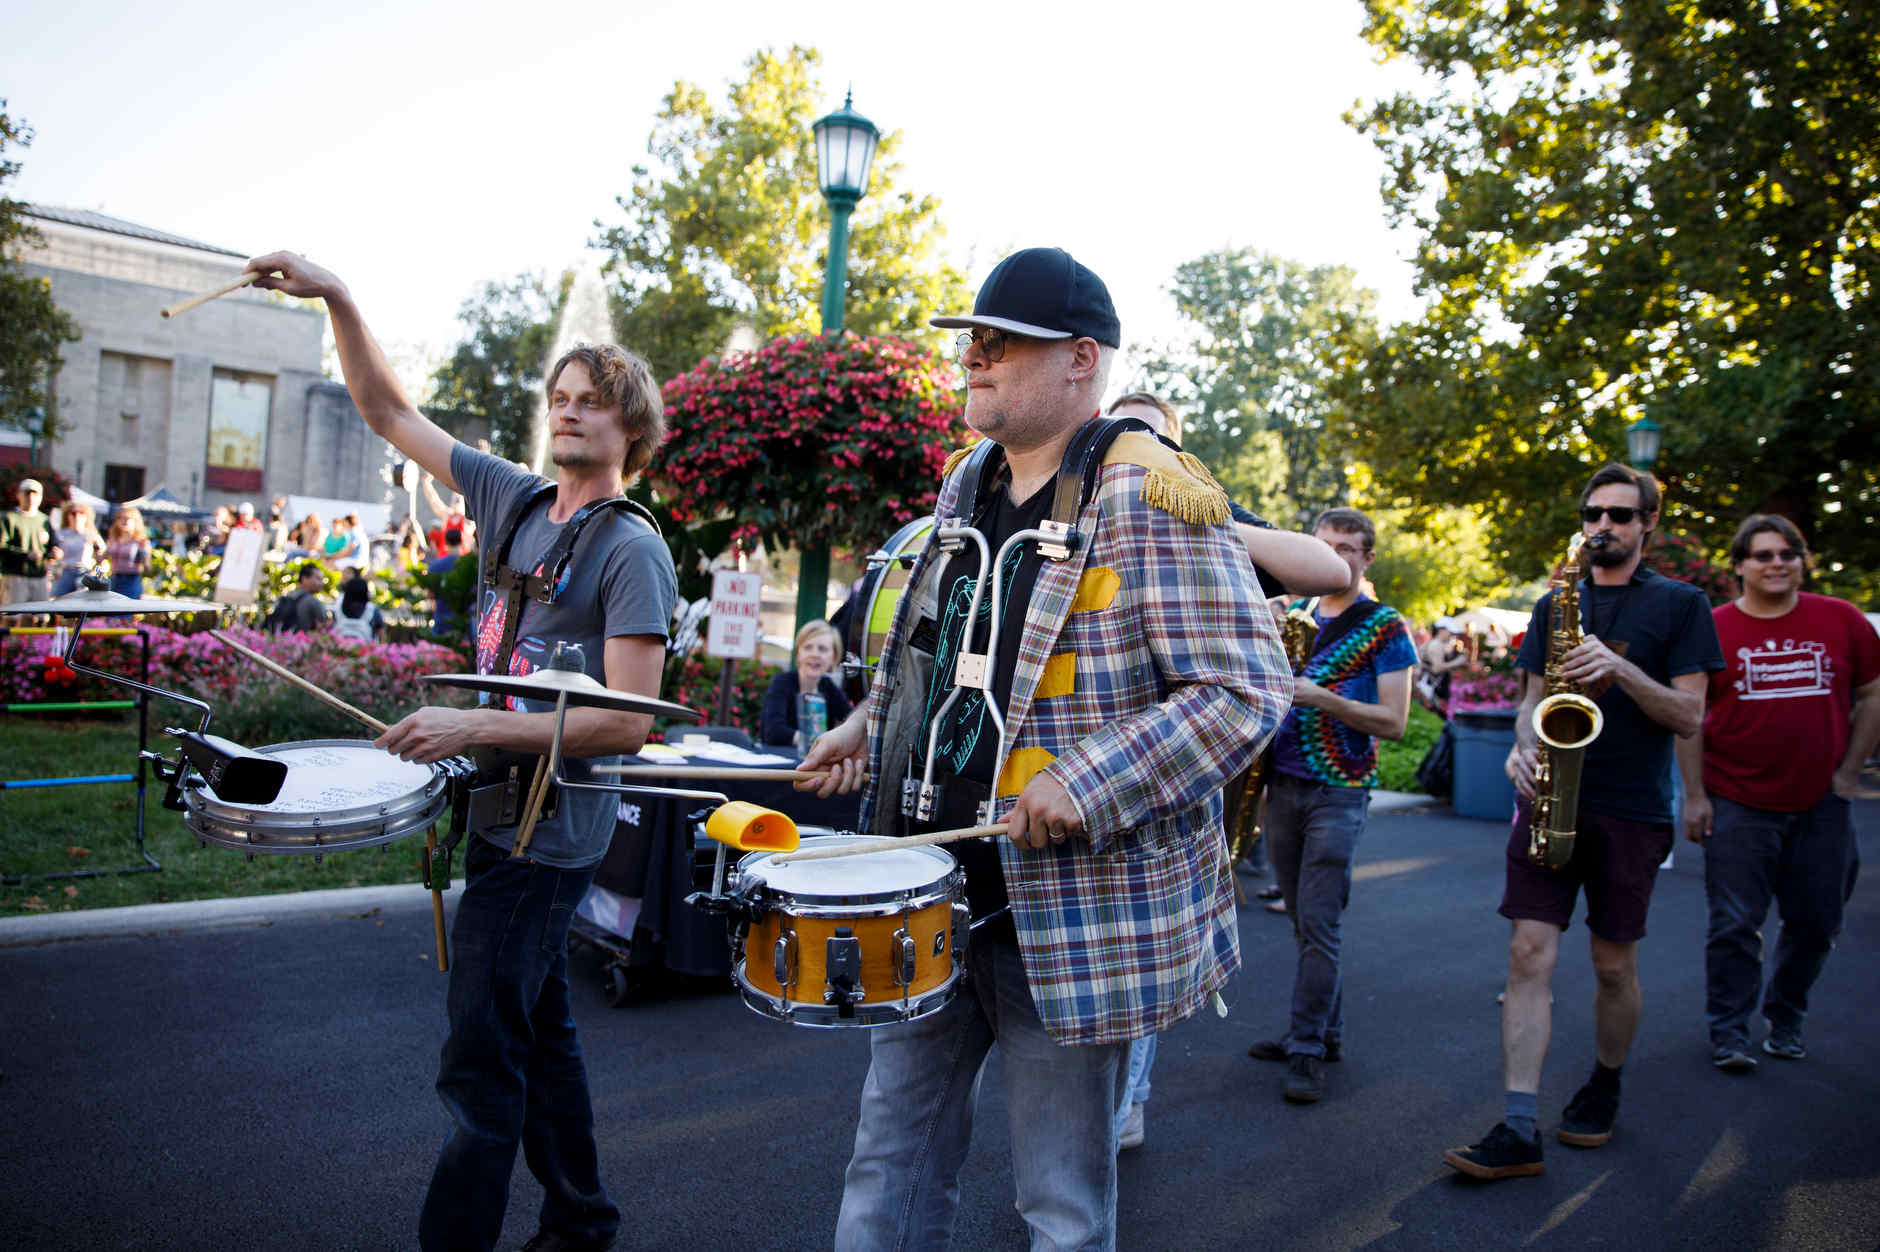 The Jefferson Street Parade Band performs during the First Thursdays Festival on the Arts Plaza at IU Bloomington on Thursday, Sept. 5, 2019. (James Brosher/Indiana University)